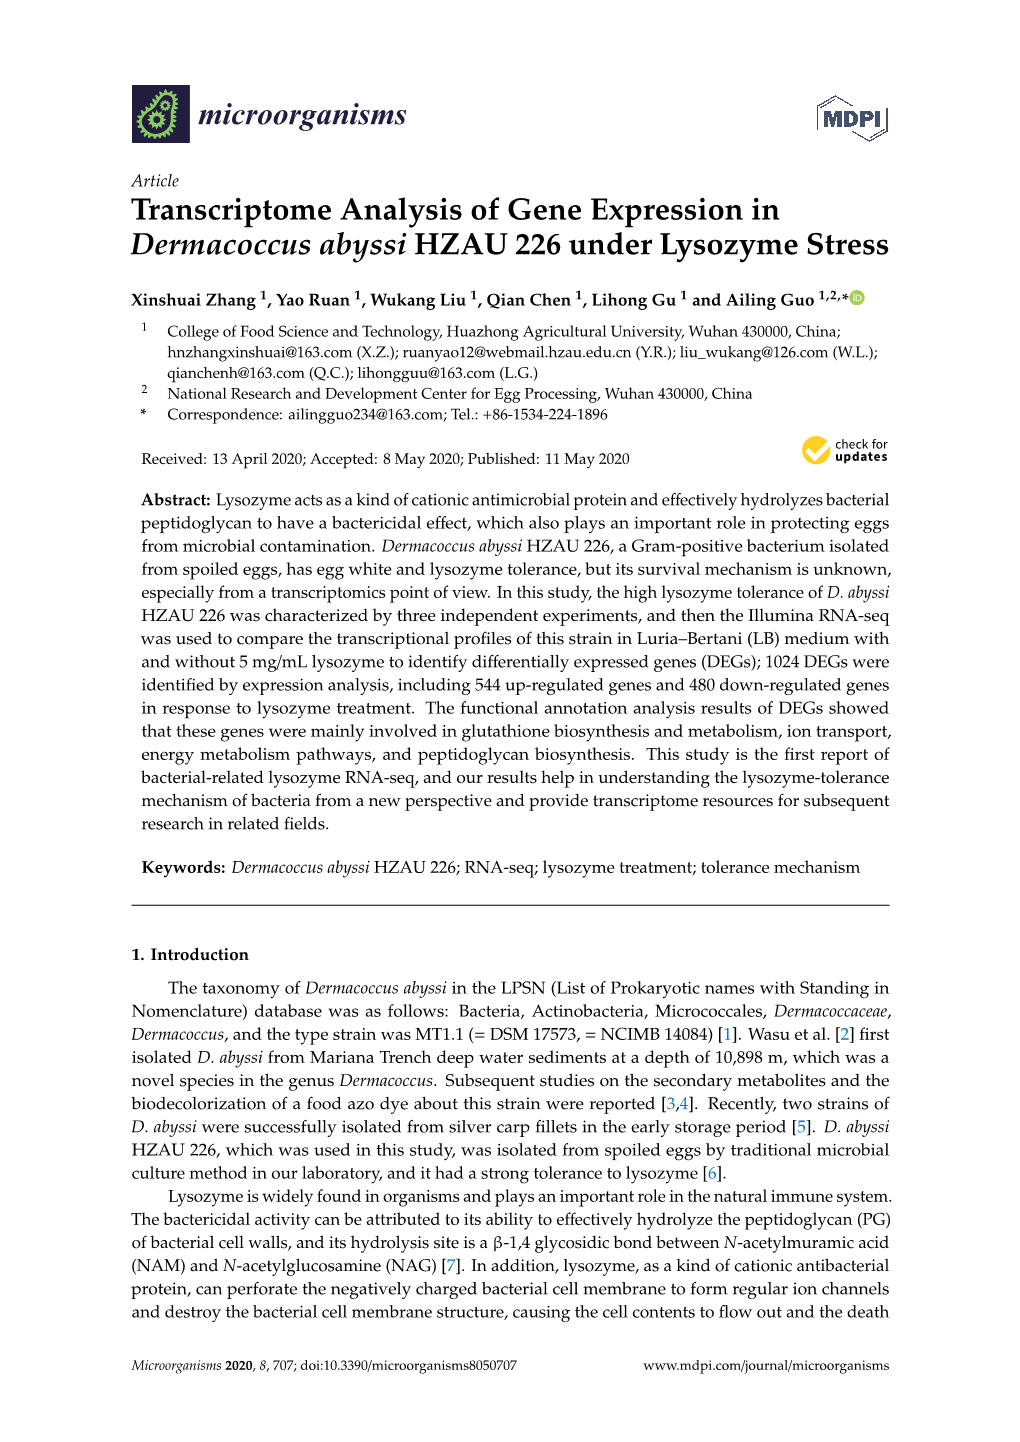 Transcriptome Analysis of Gene Expression in Dermacoccus Abyssi HZAU 226 Under Lysozyme Stress